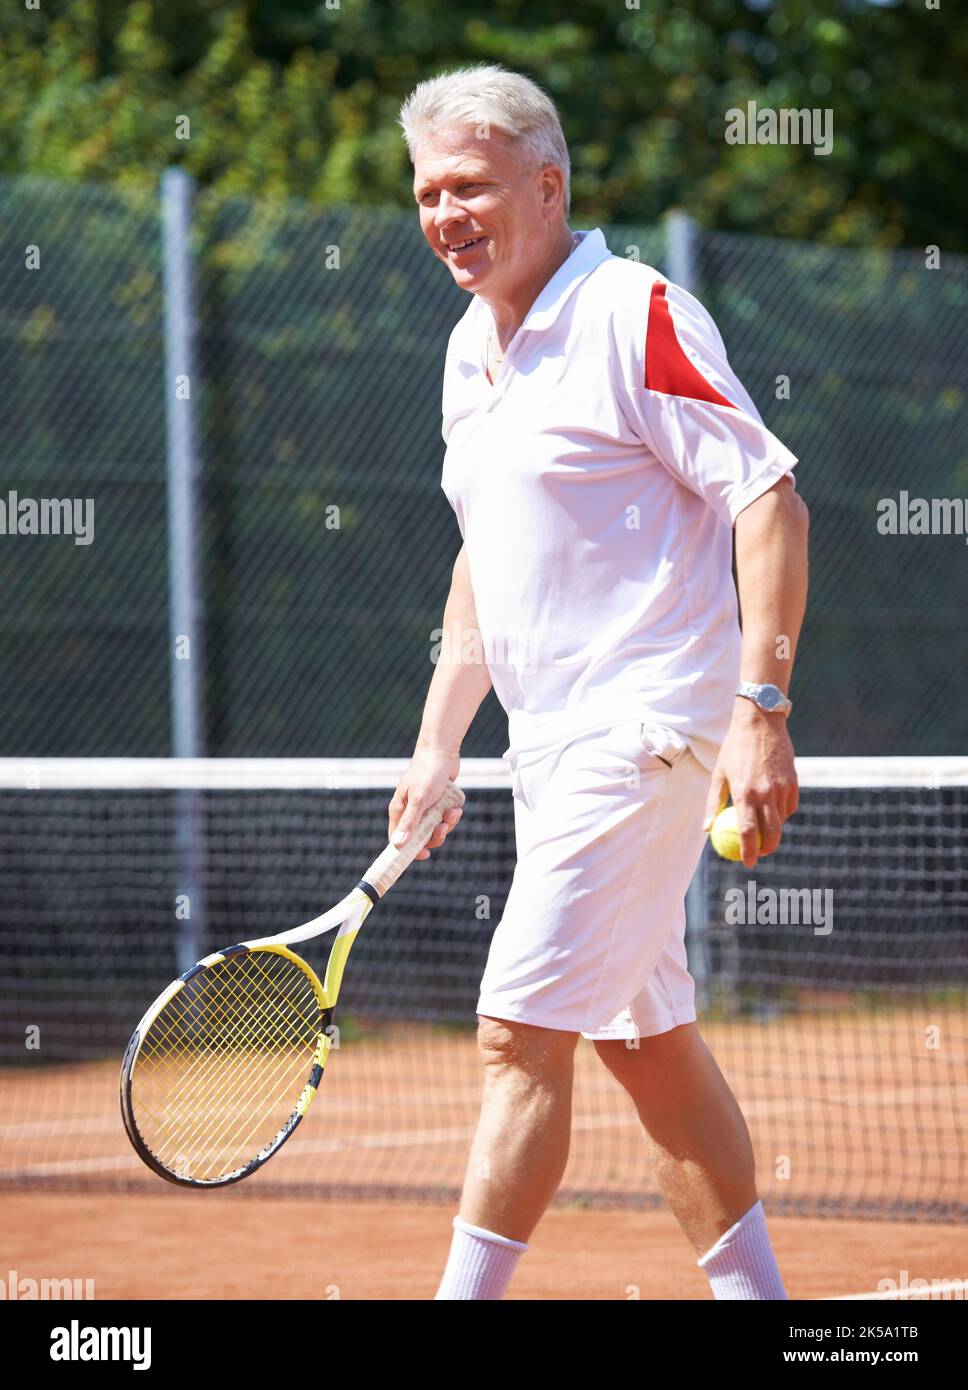 Tennis has always been his favorite past-time. A senior man walking on a clay court during a game of tennis. Stock Photo